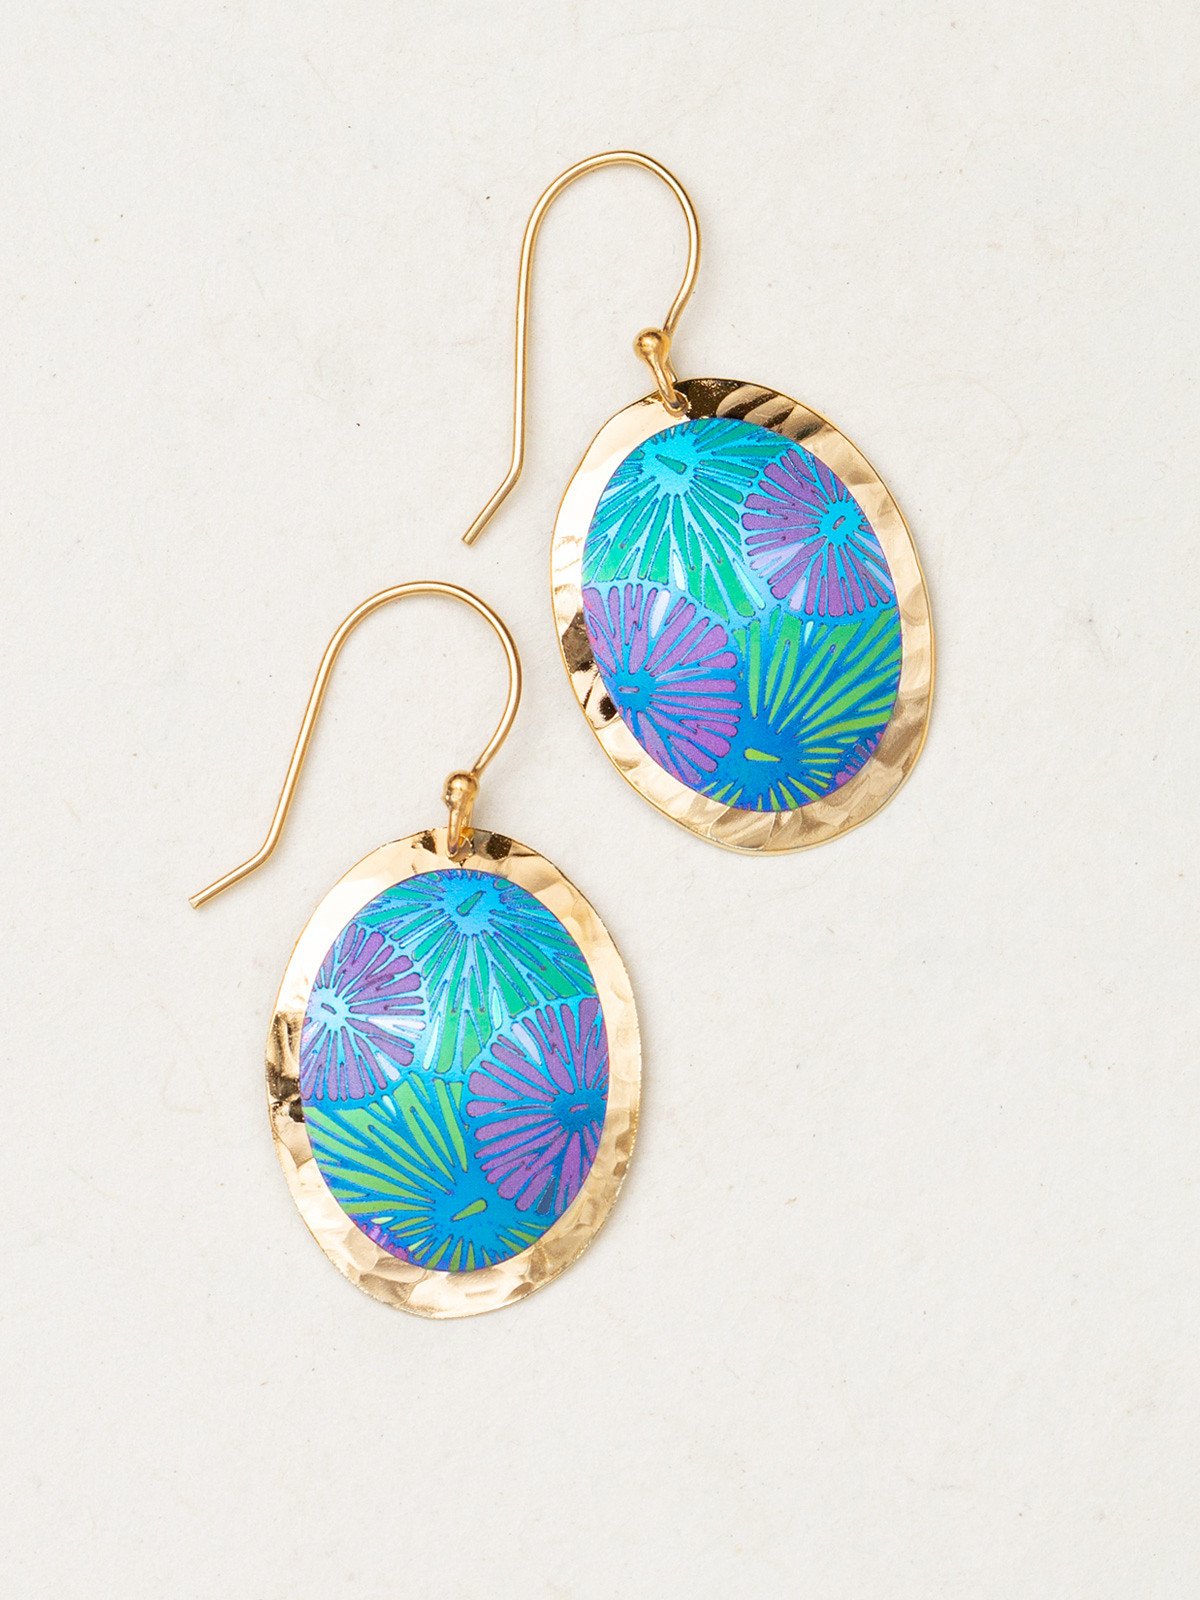 Blue and purple mod flower earrings by Holly Yashi